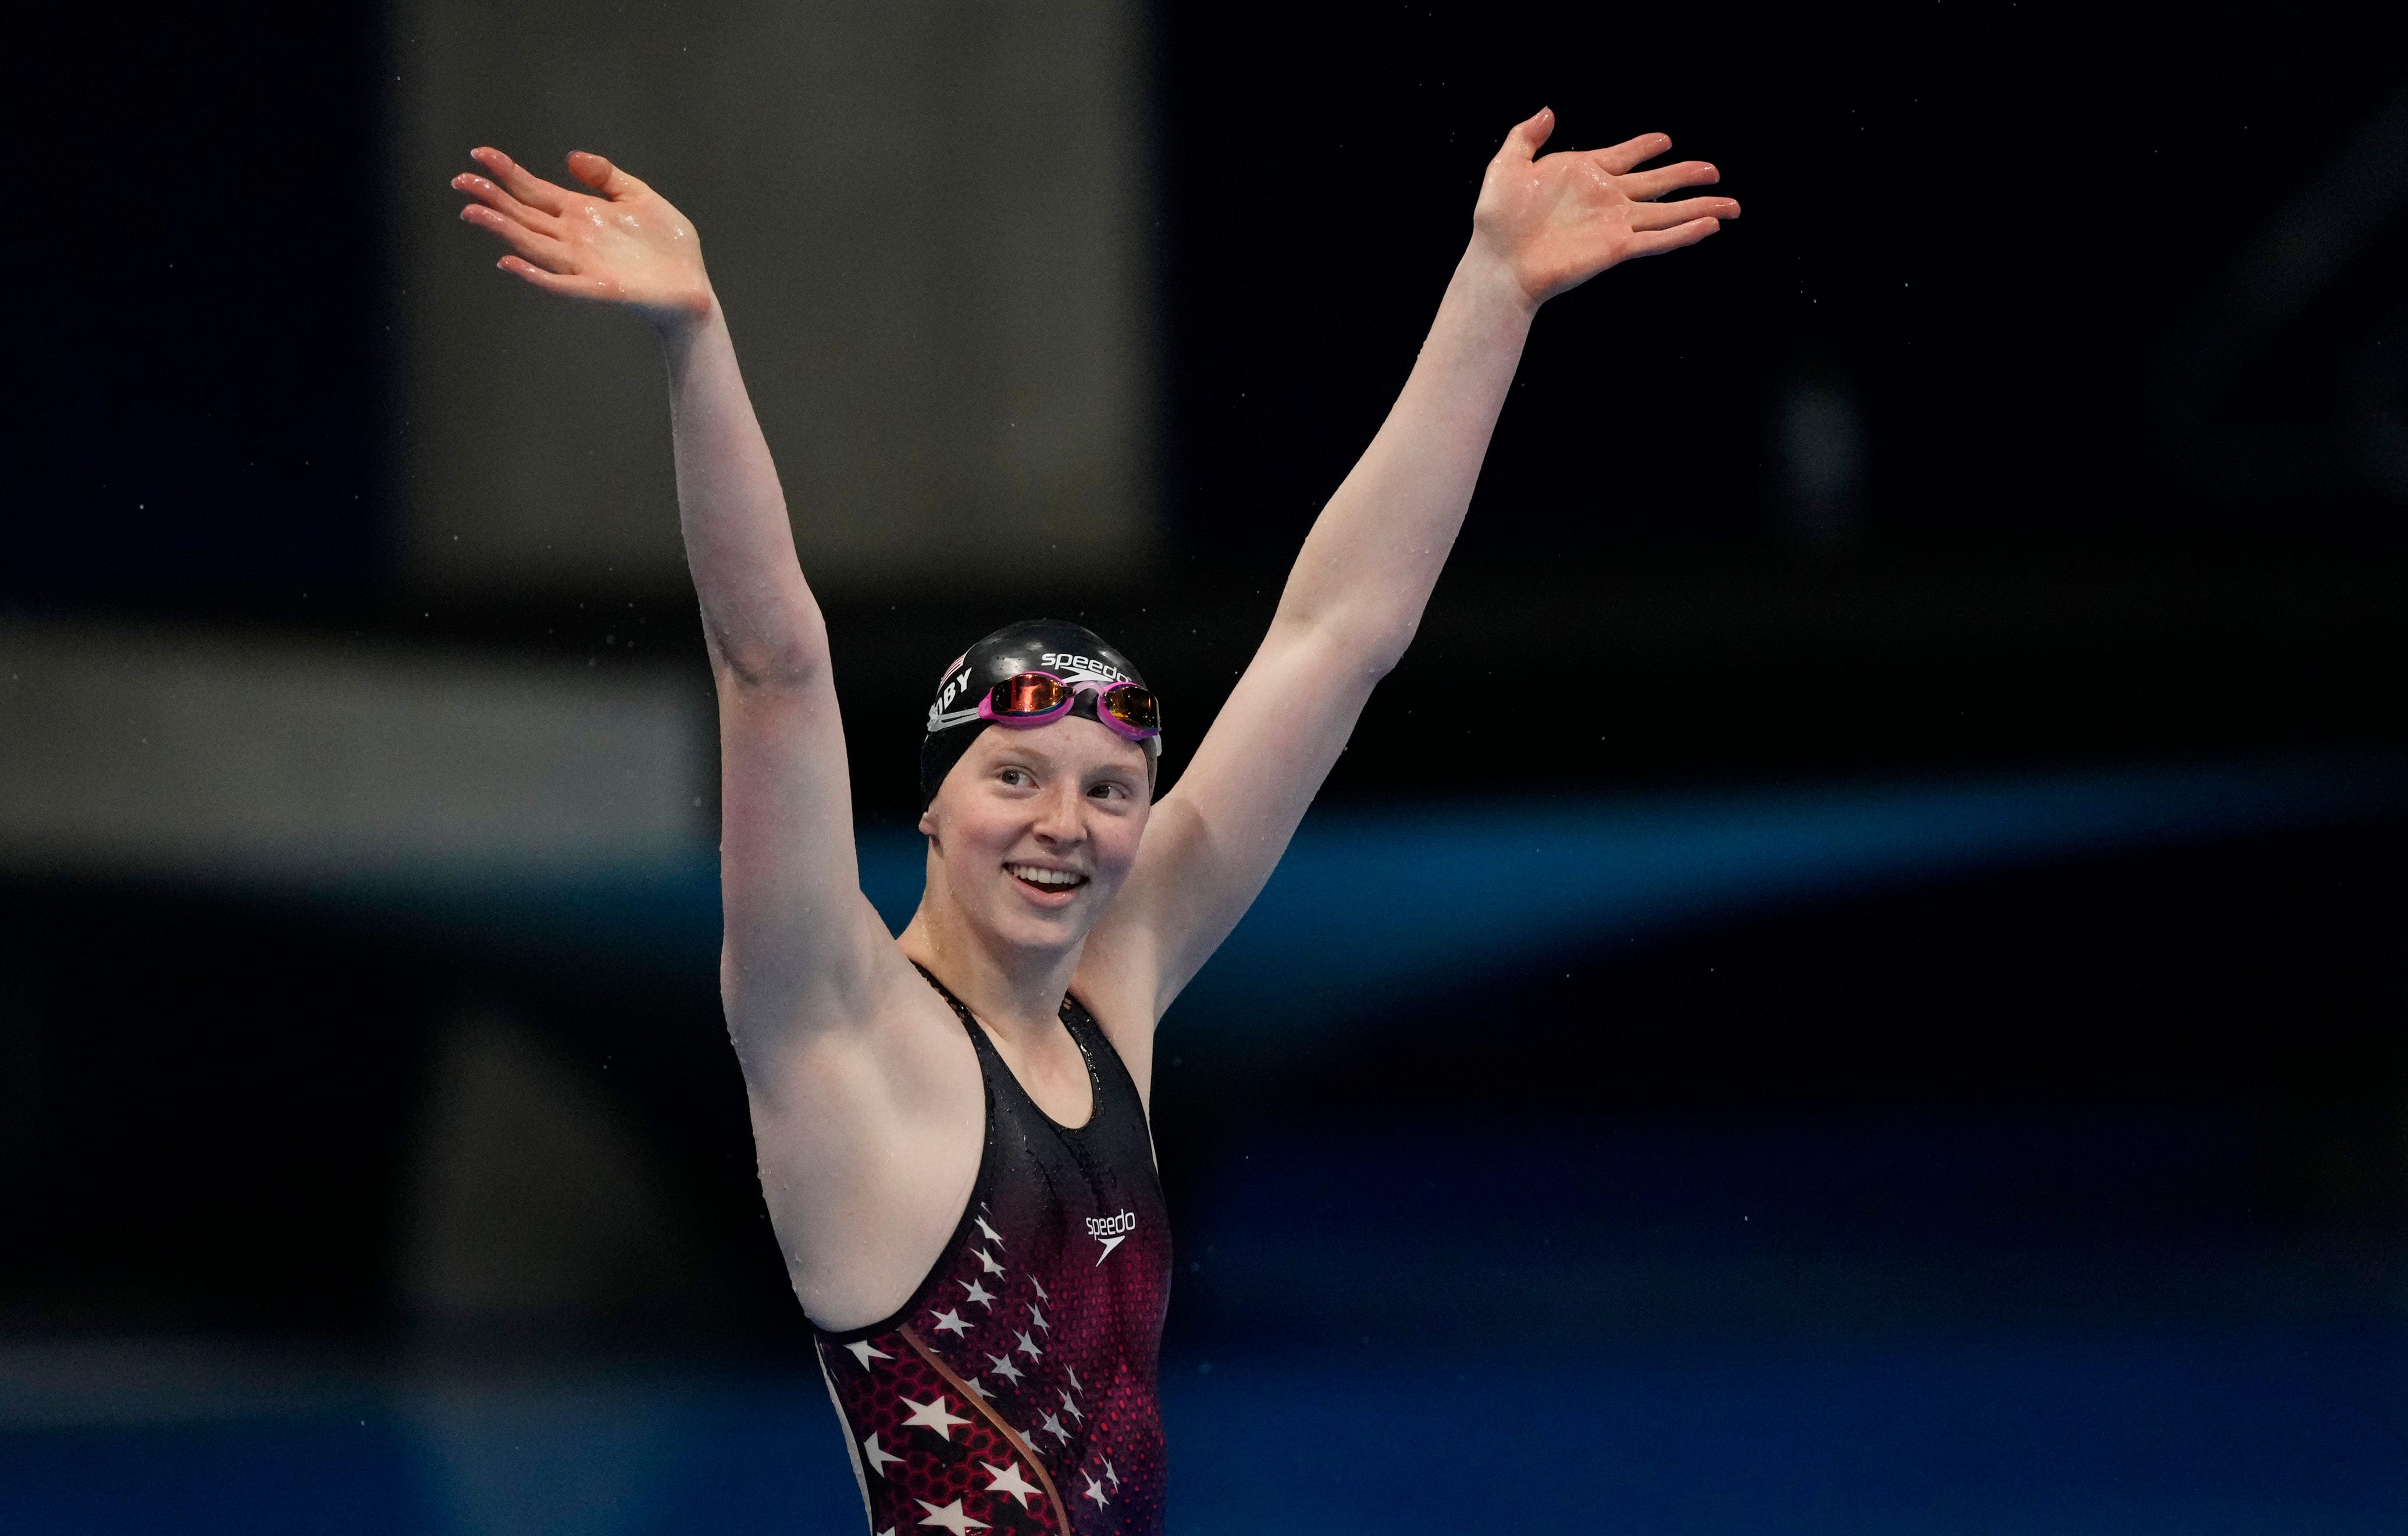 US teen Lydia Jacoby wins gold medal in 100 breaststroke at Tokyo